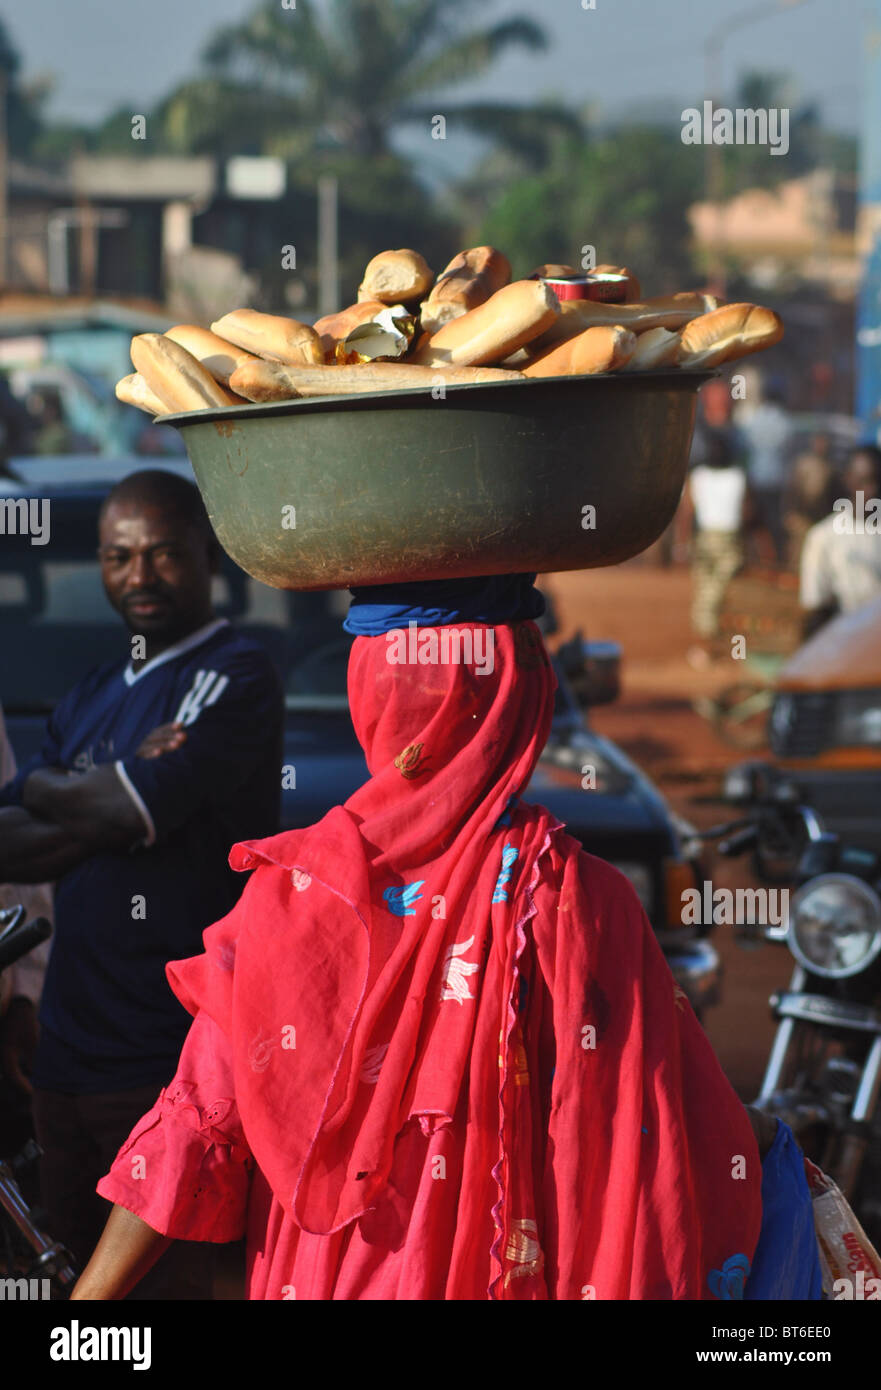 Woman selling baguettes on the street in Man, Ivory Coast, West Africa Stock Photo